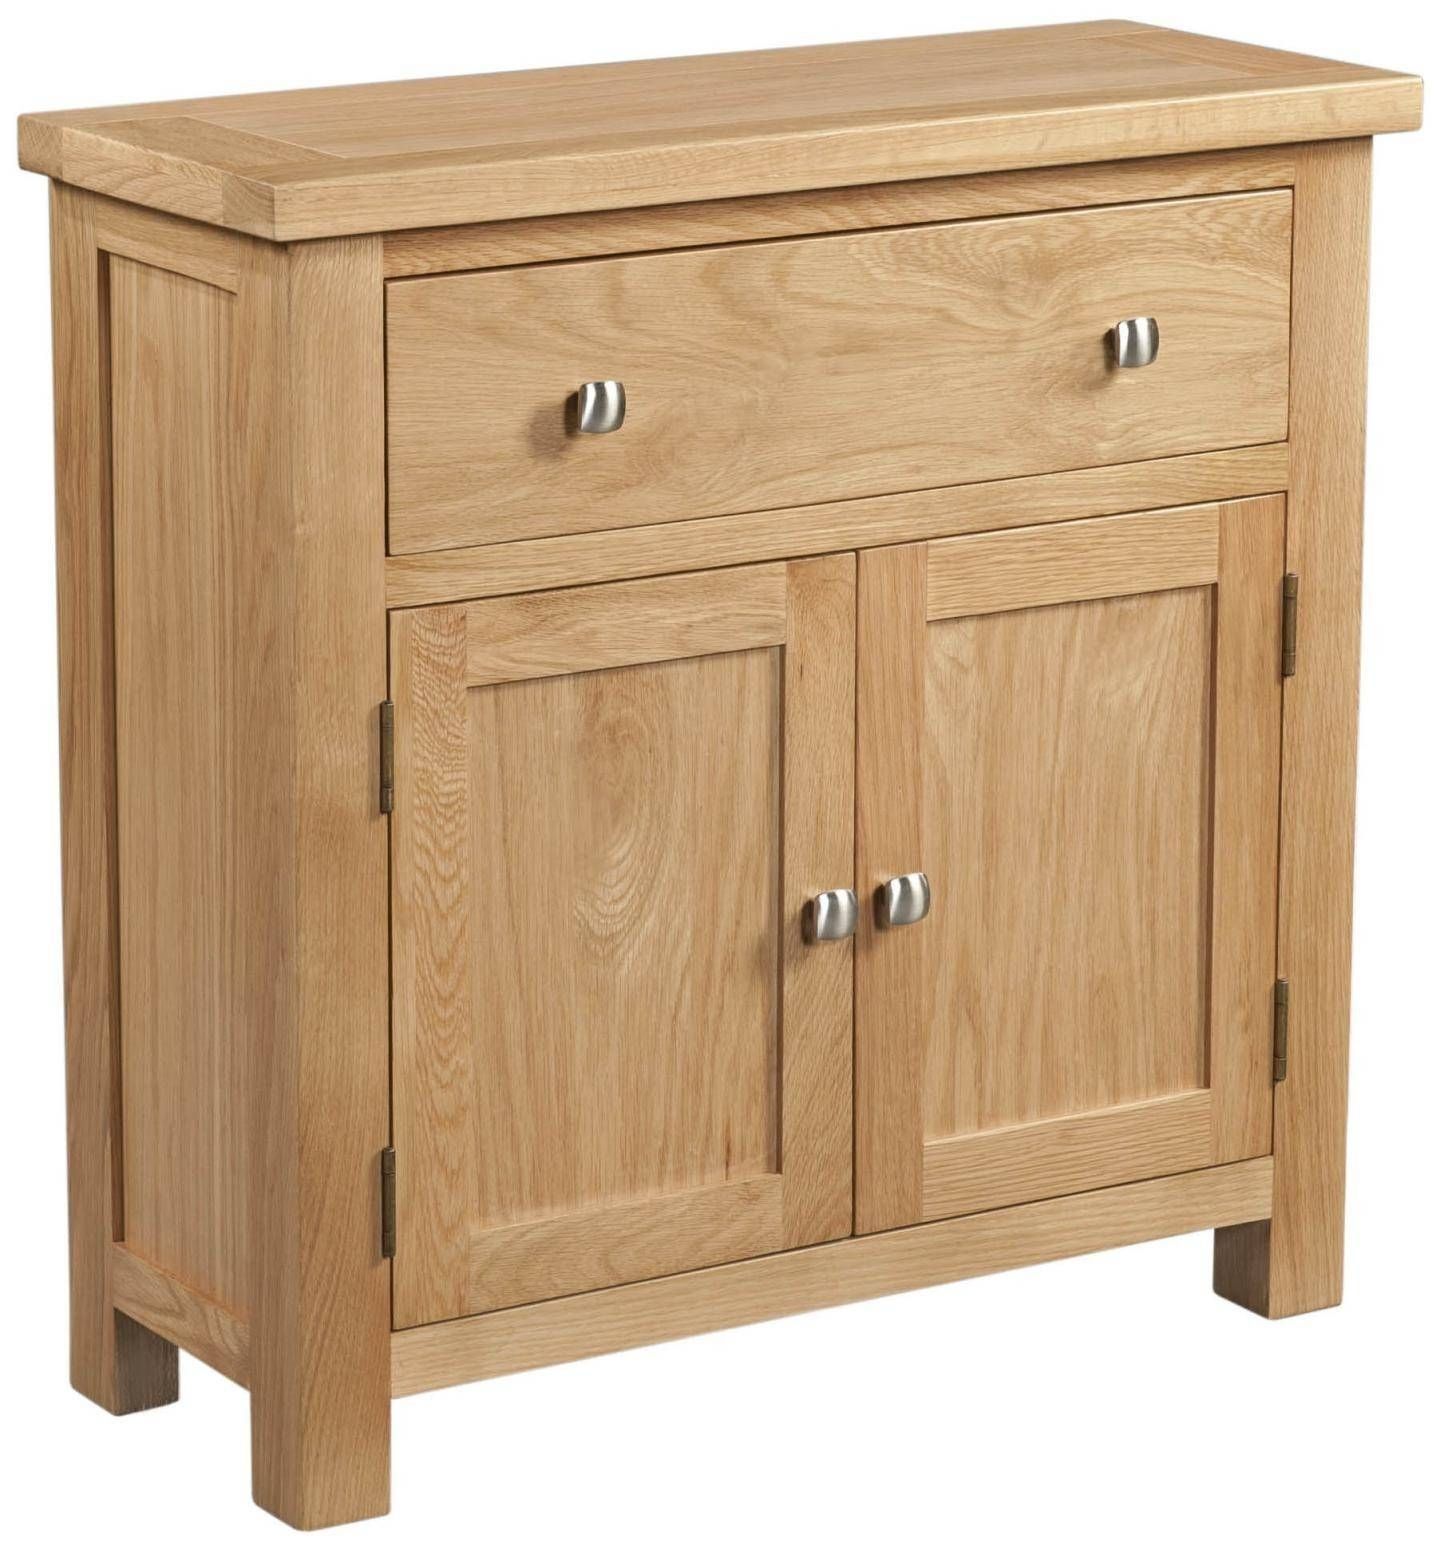 Lovely Pine & Oak Sideboards | Willoby's Furniture Swindon, Wiltshire Within Oak Sideboards For Sale (View 10 of 30)